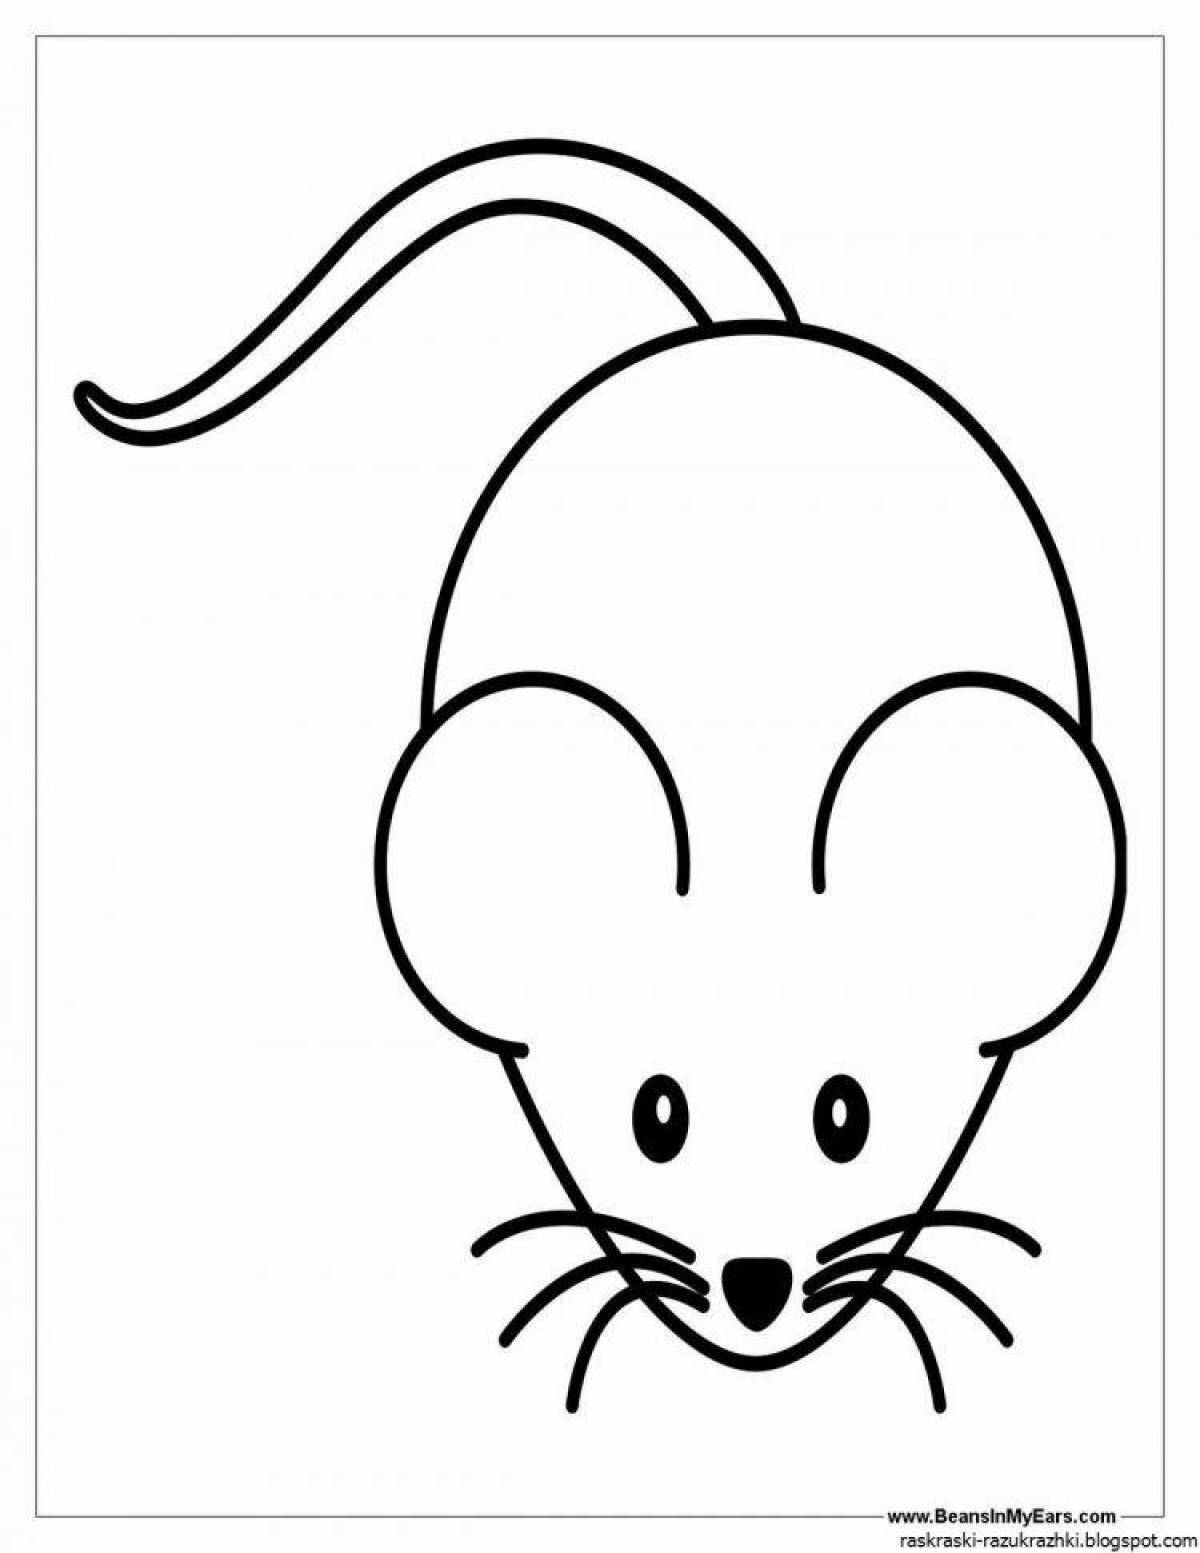 Merry mouse norushka coloring book